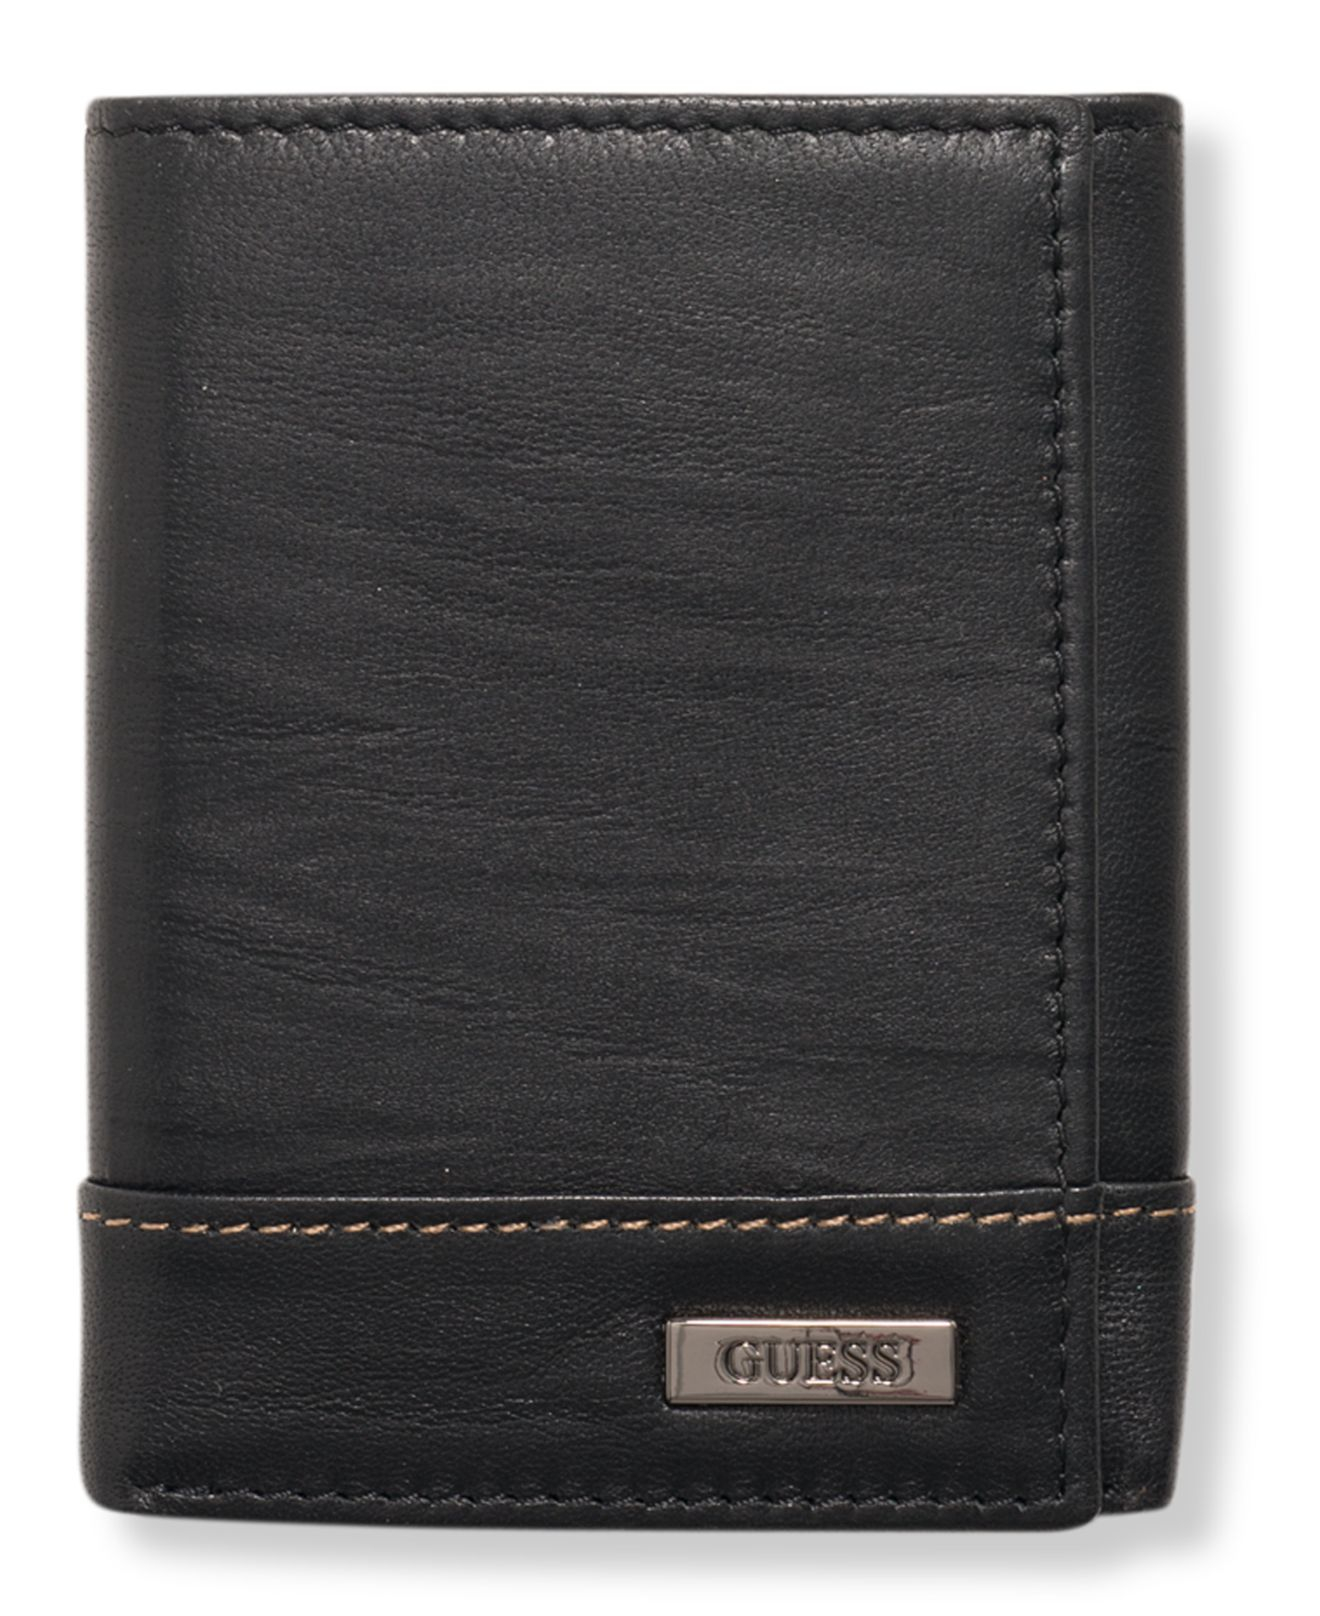 Lyst - Guess Wallets, Chico Trifold Wallet in Black for Men